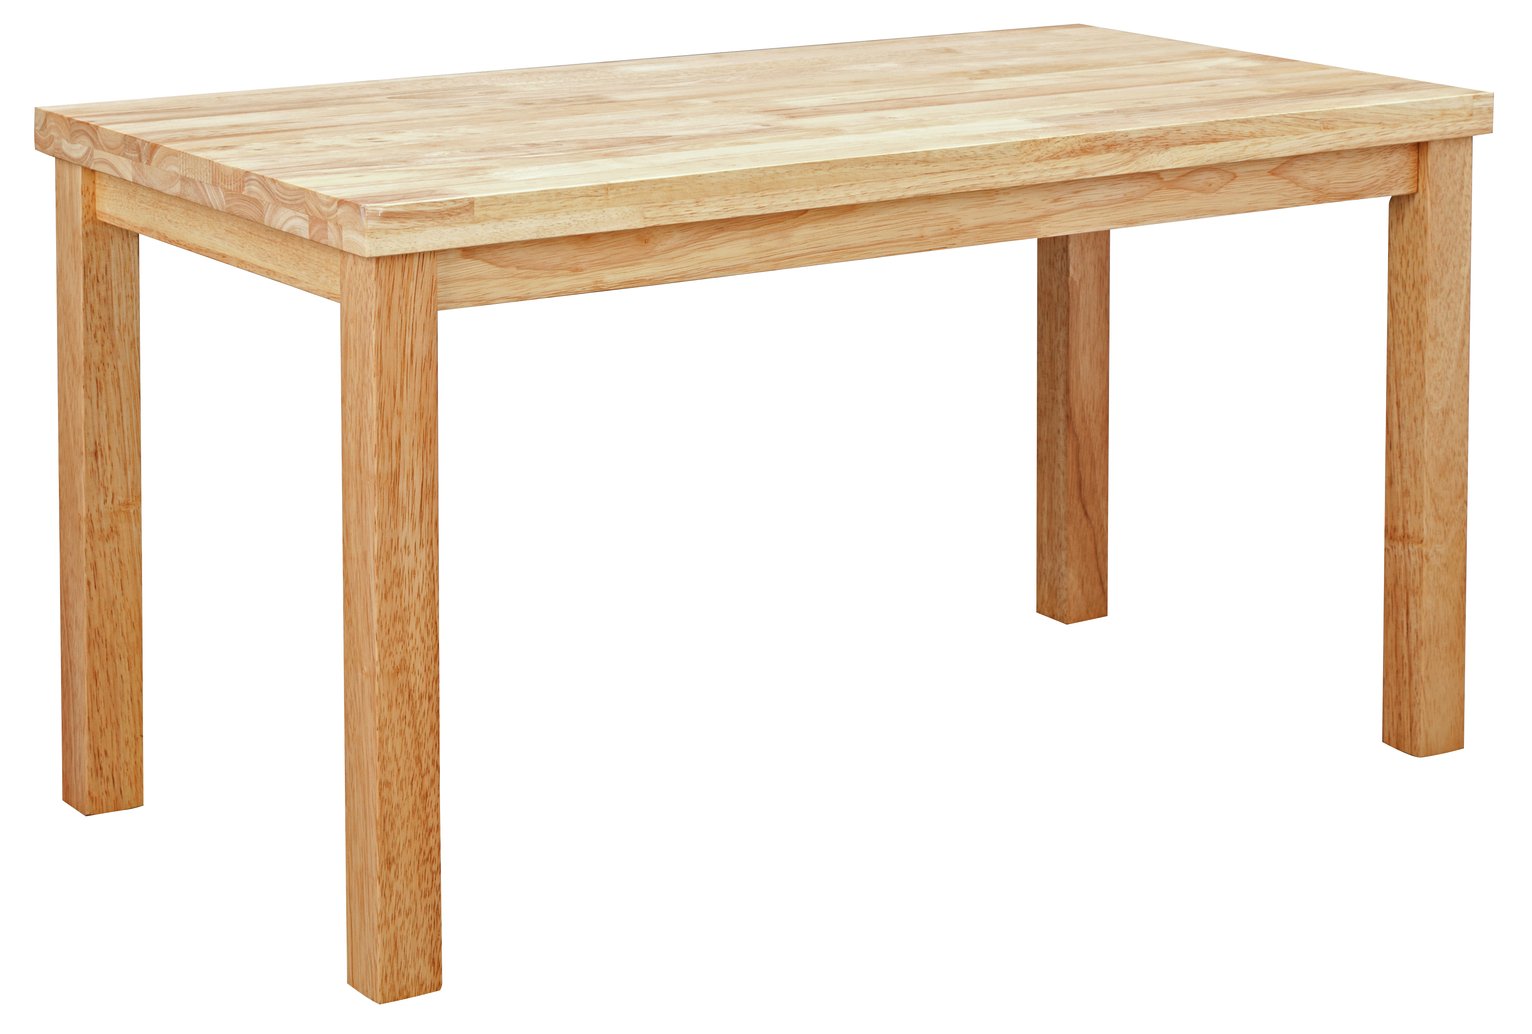 Argos Home Gloucester Solid Wood Coffee Table - Natural